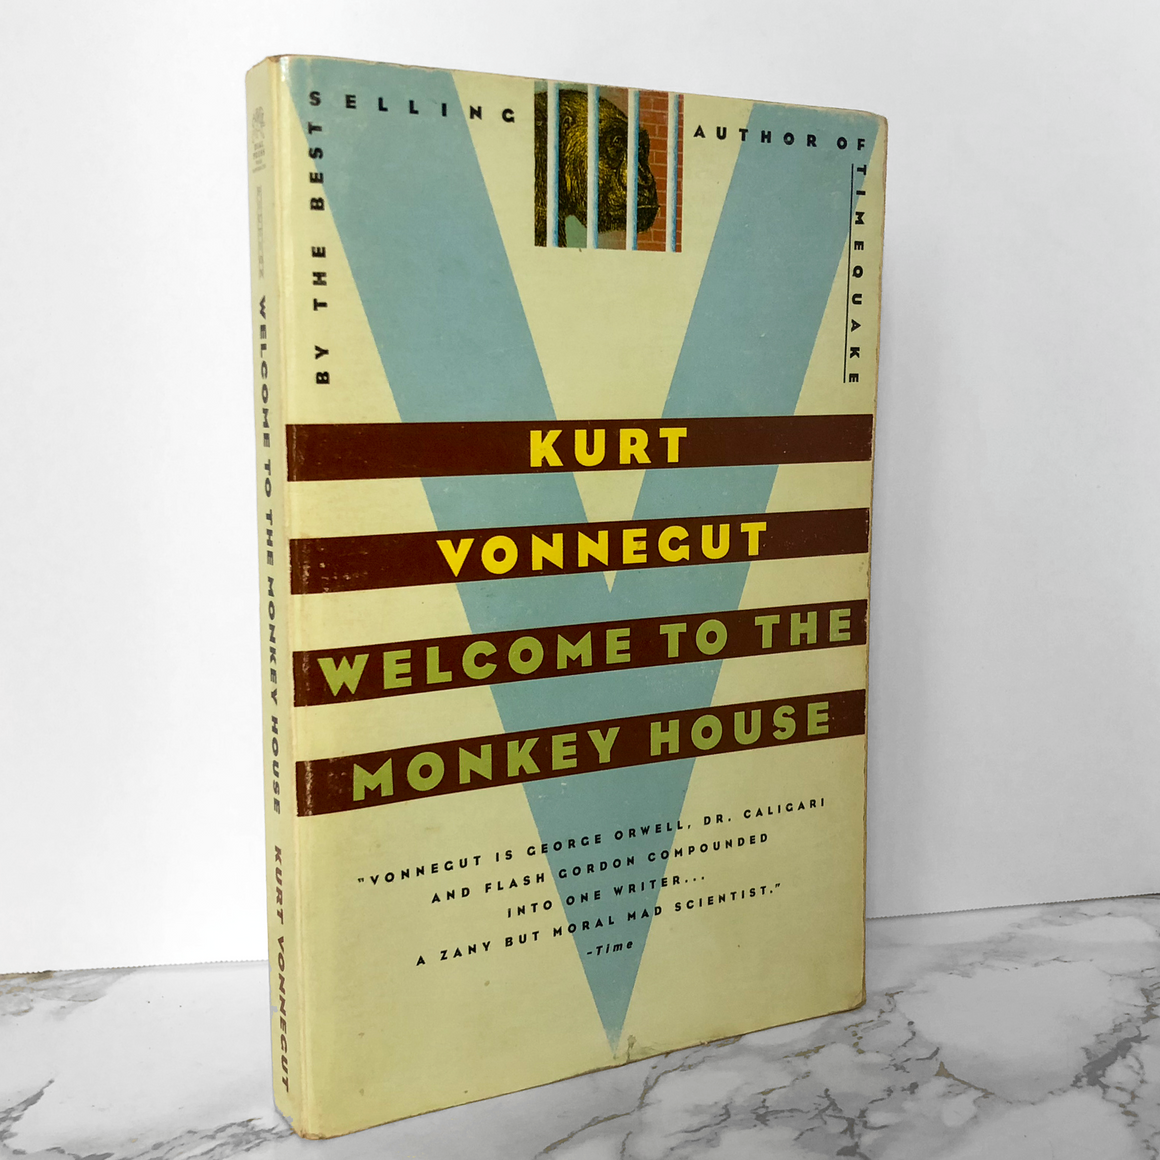 Welcome to the Monkey House by Kurt Vonnegut Jr.